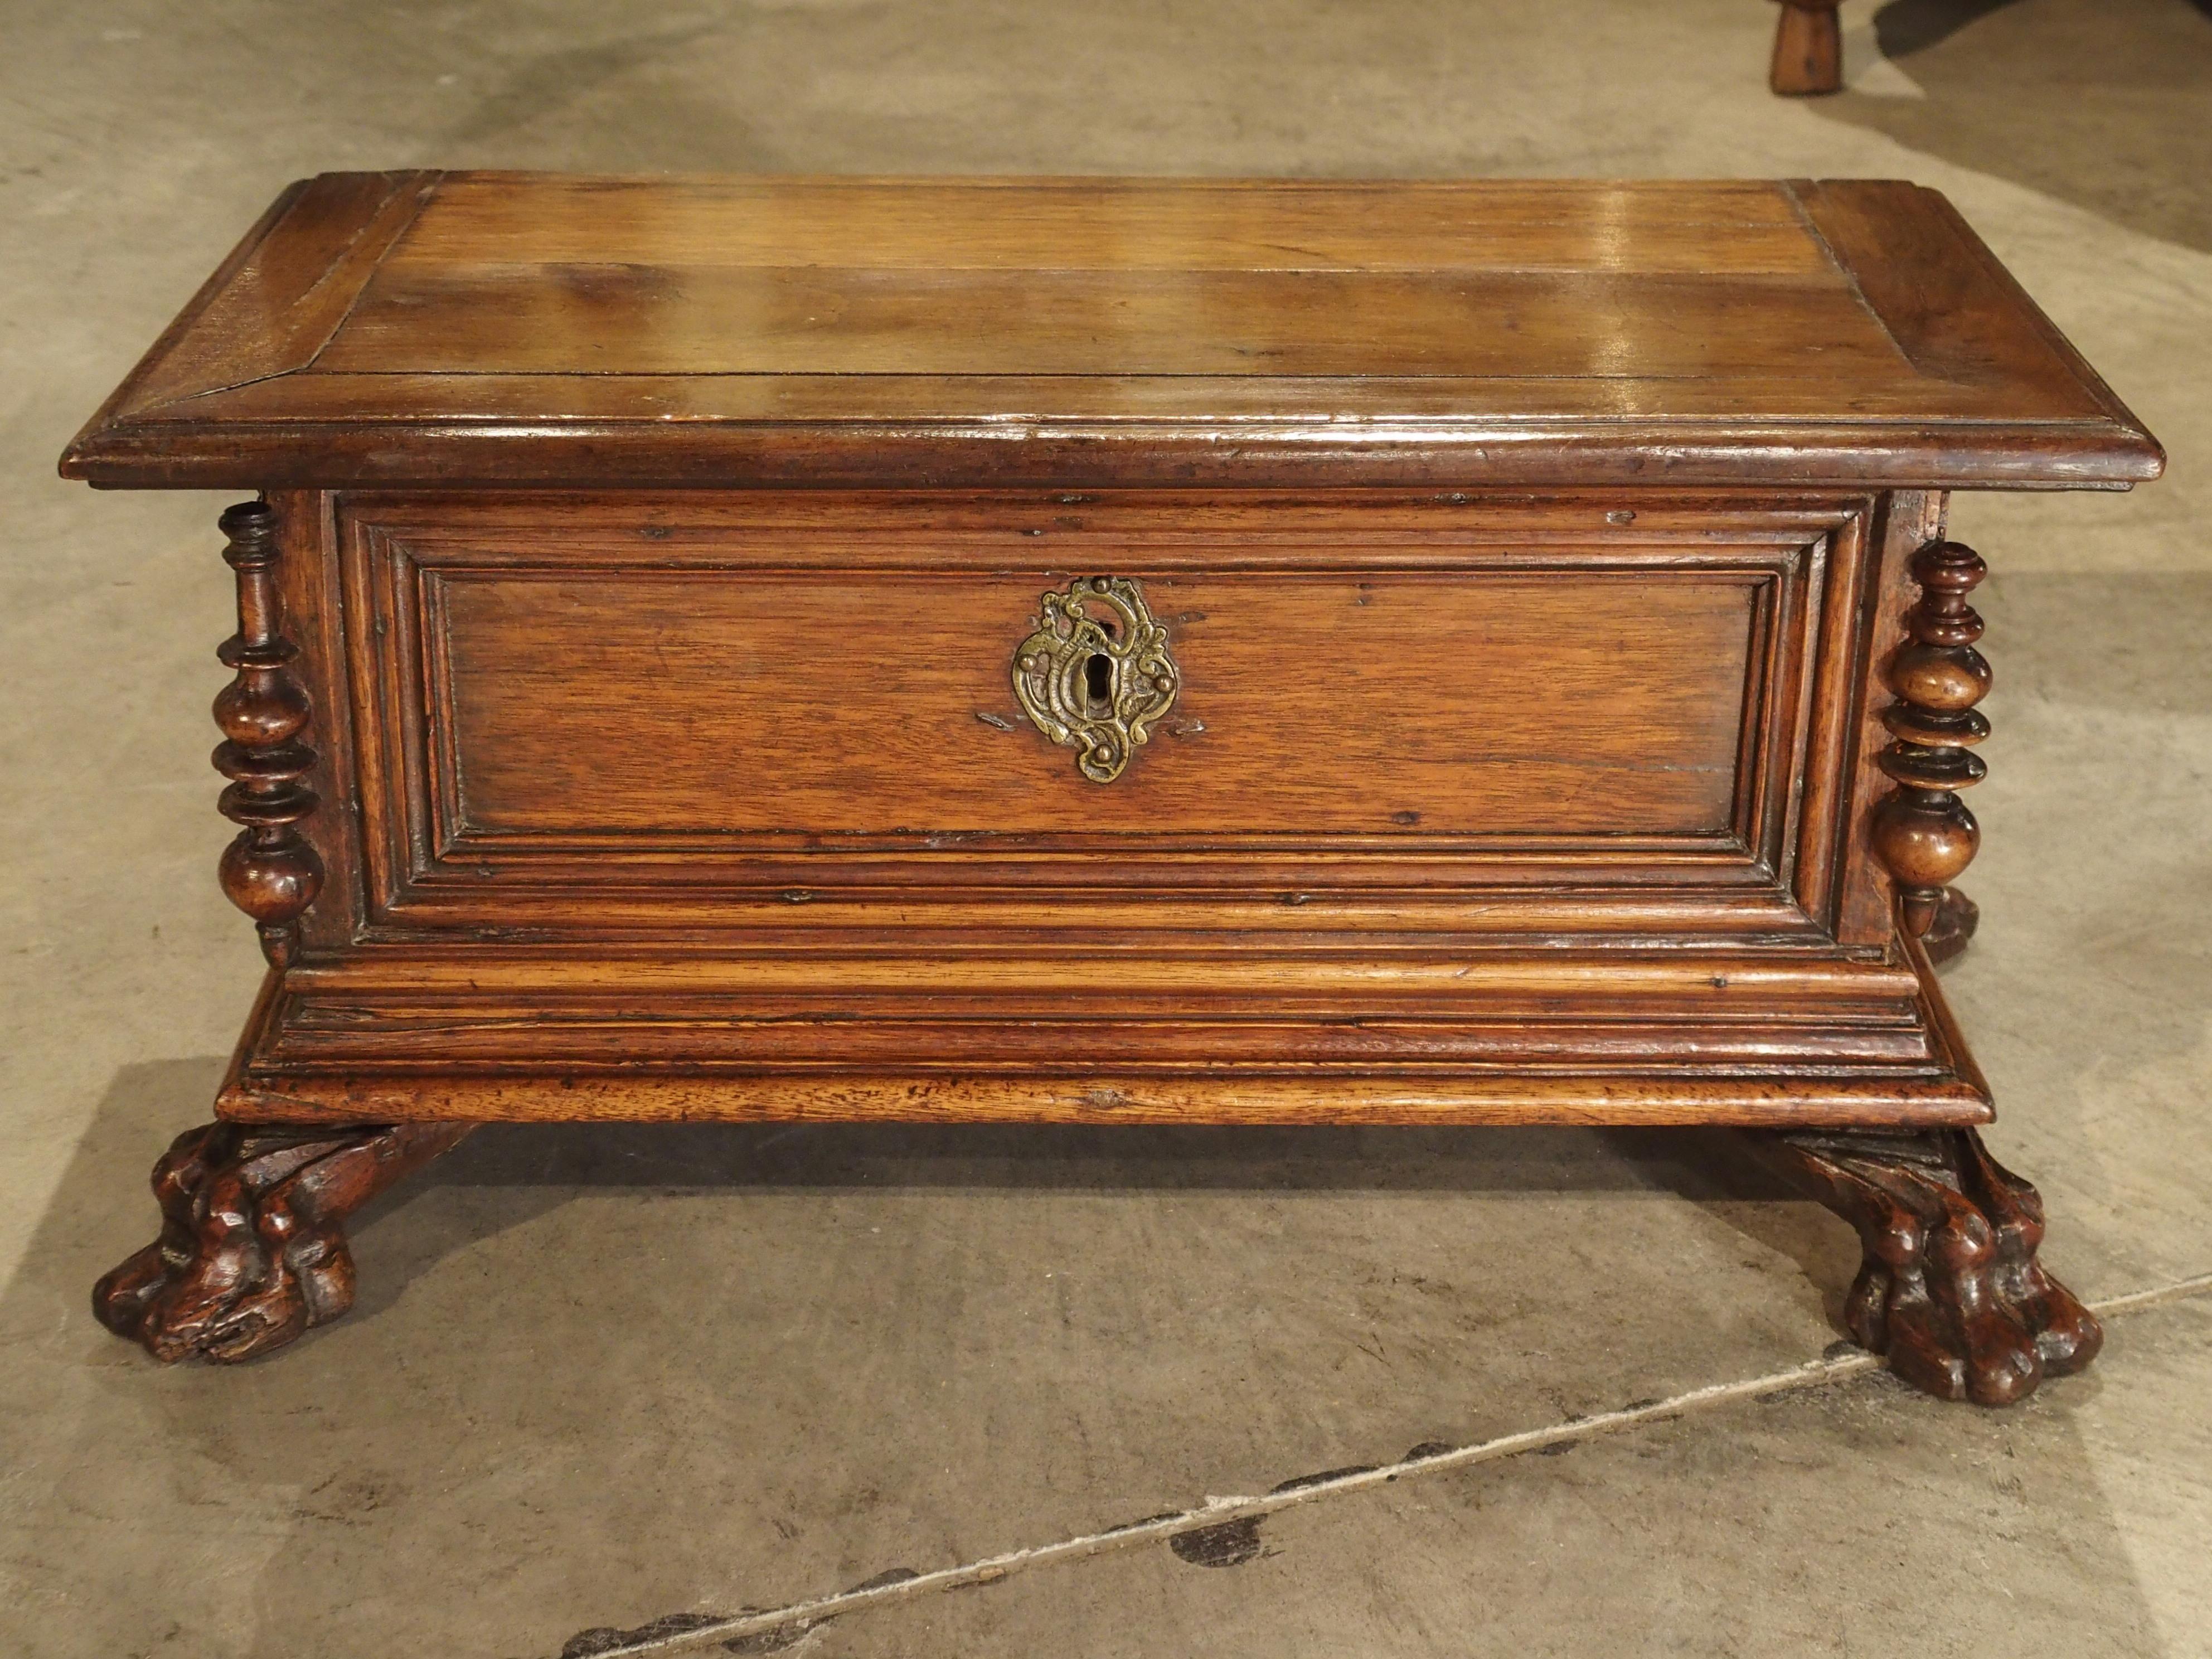 Small Antique Walnut Wood Table Trunk from Northern Italy, circa 1700 1